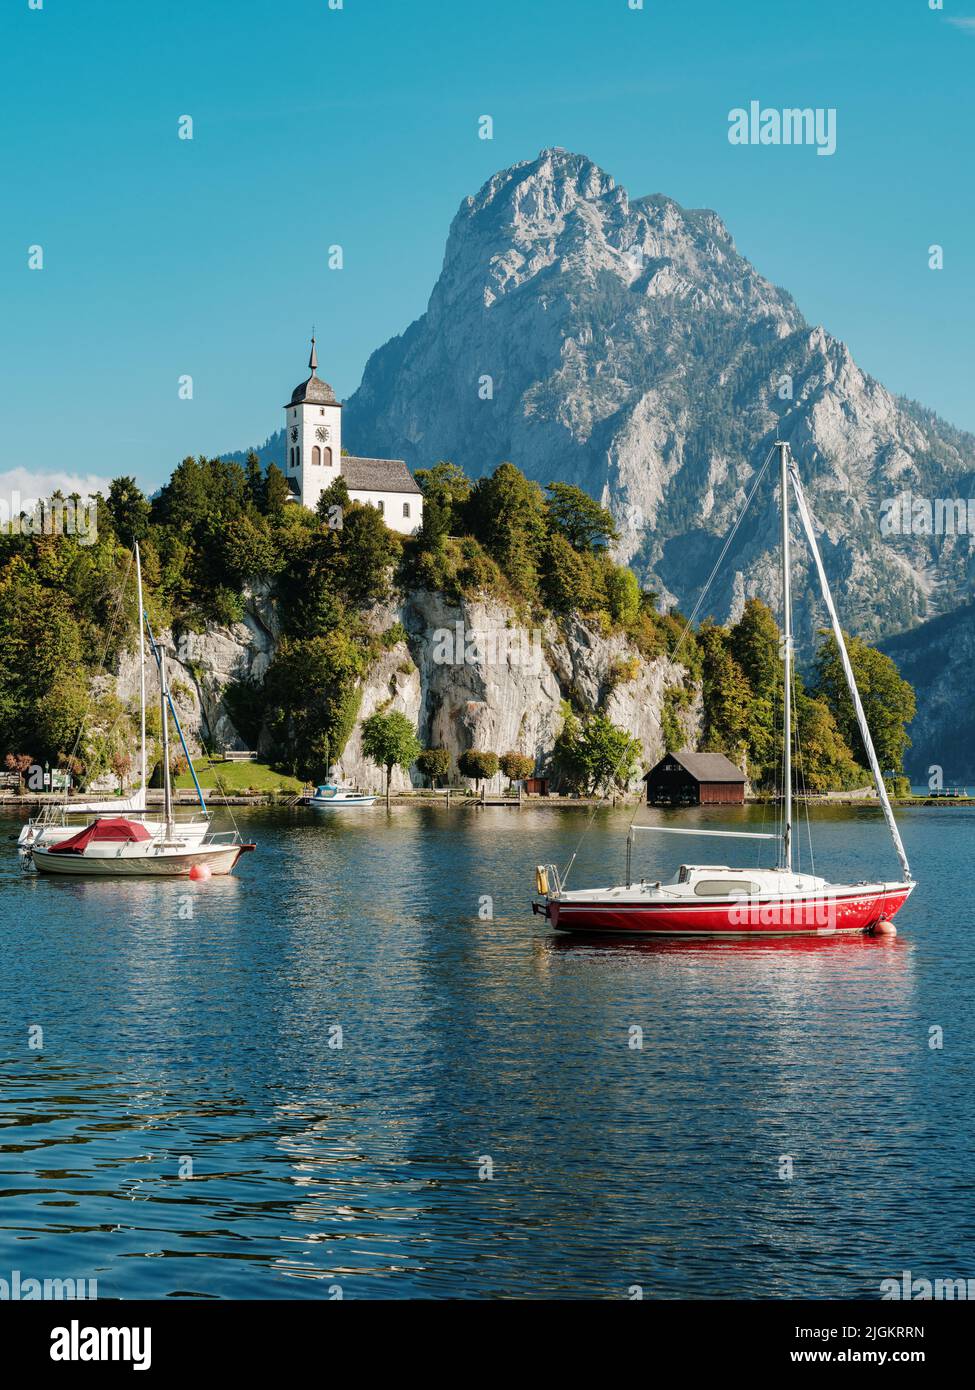 Scenic view on the perched Johannesberg Chapel in Austria, surrounded by mountains and the lake Traunsee Stock Photo